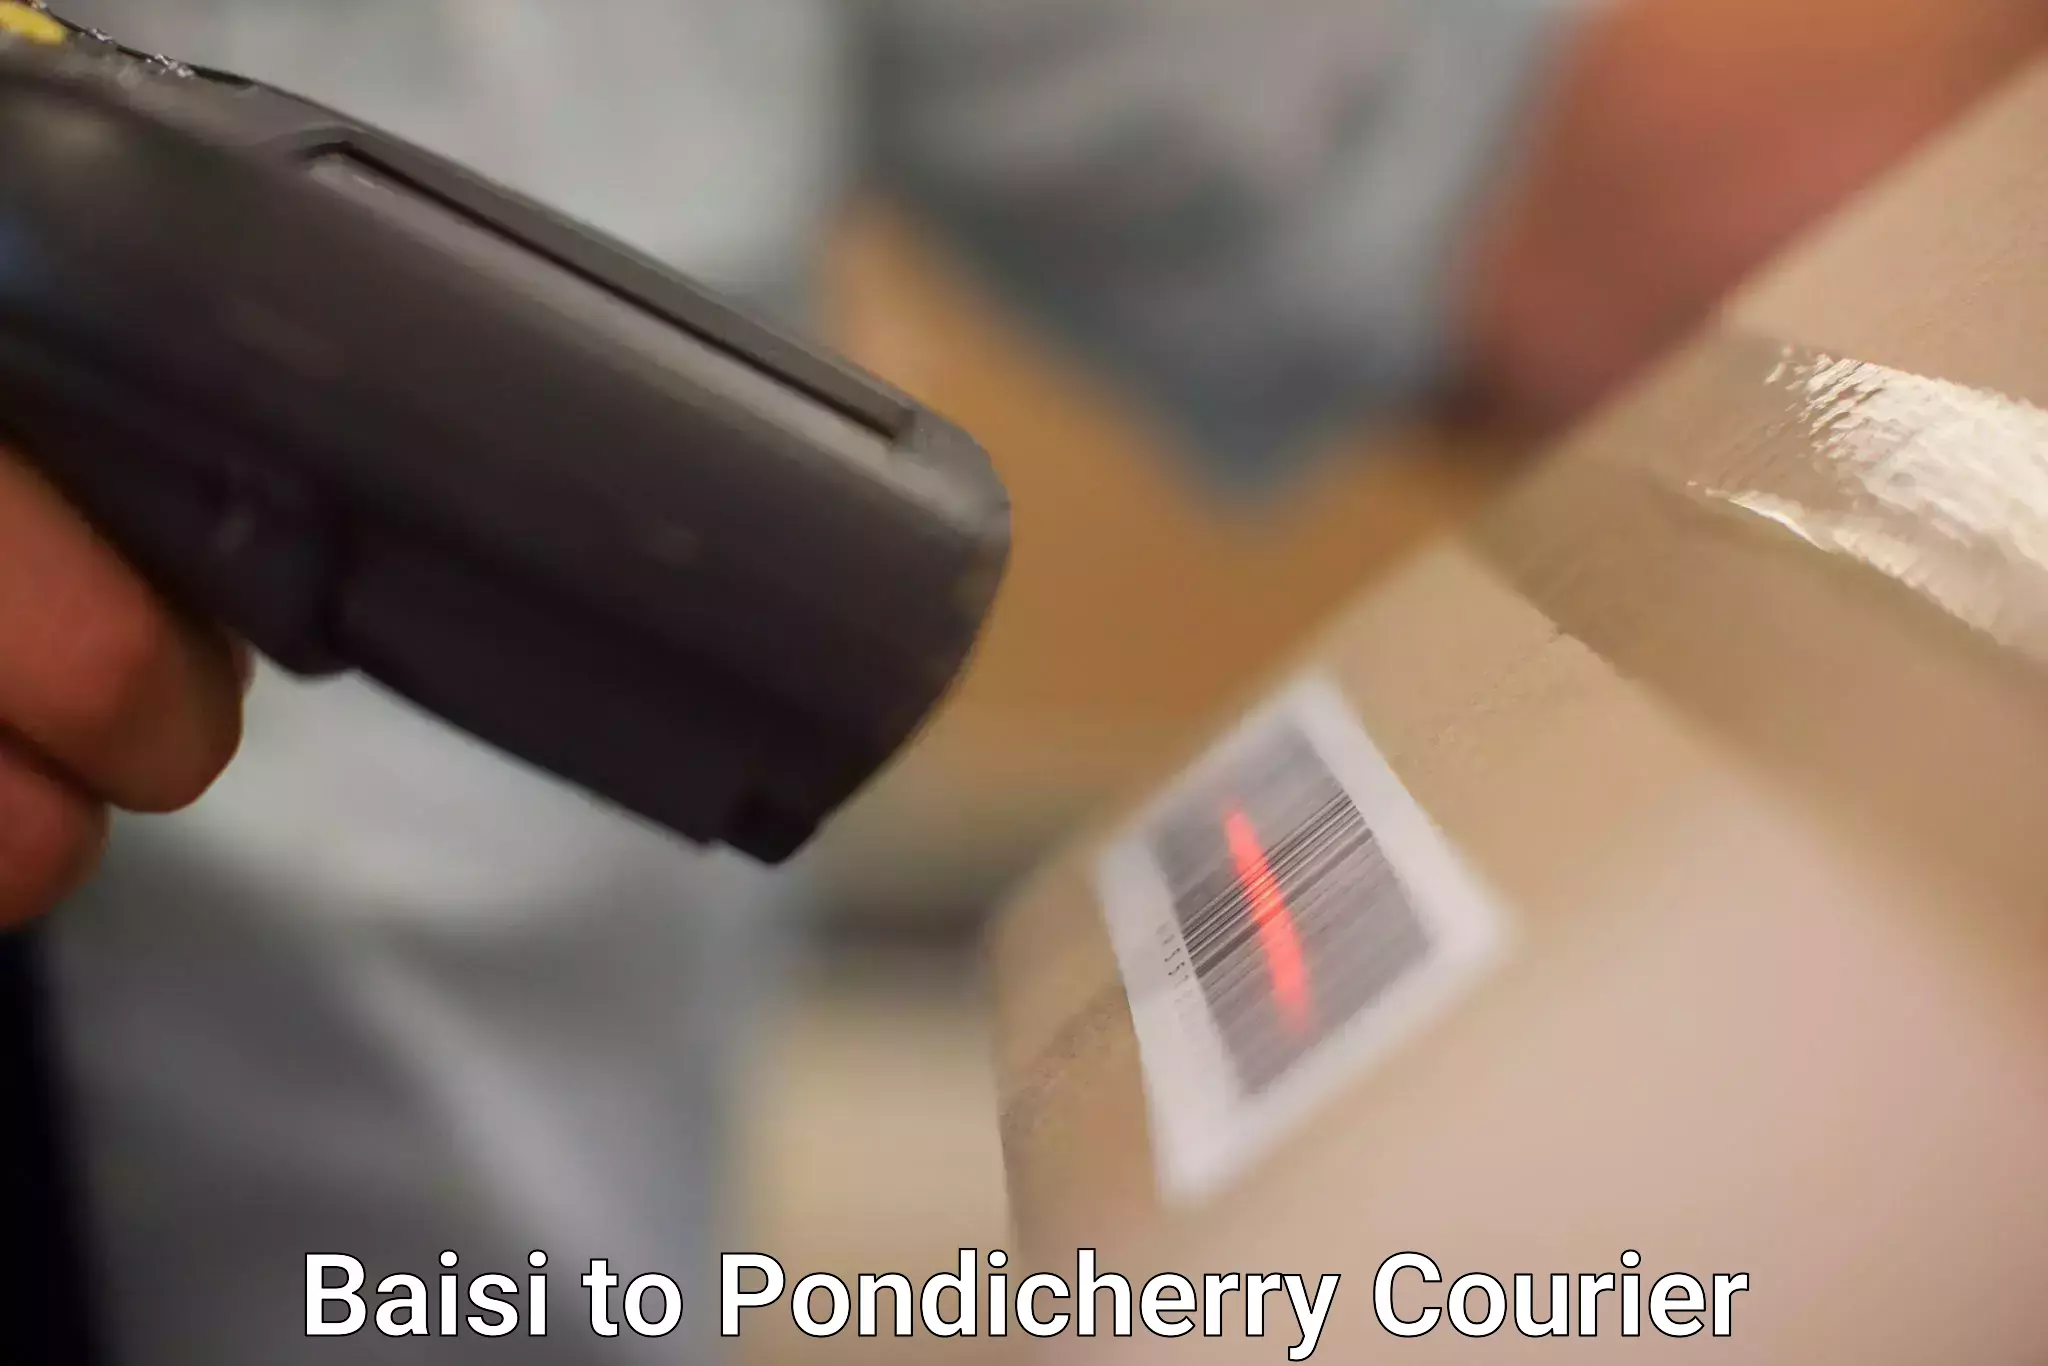 Package delivery network Baisi to Pondicherry University